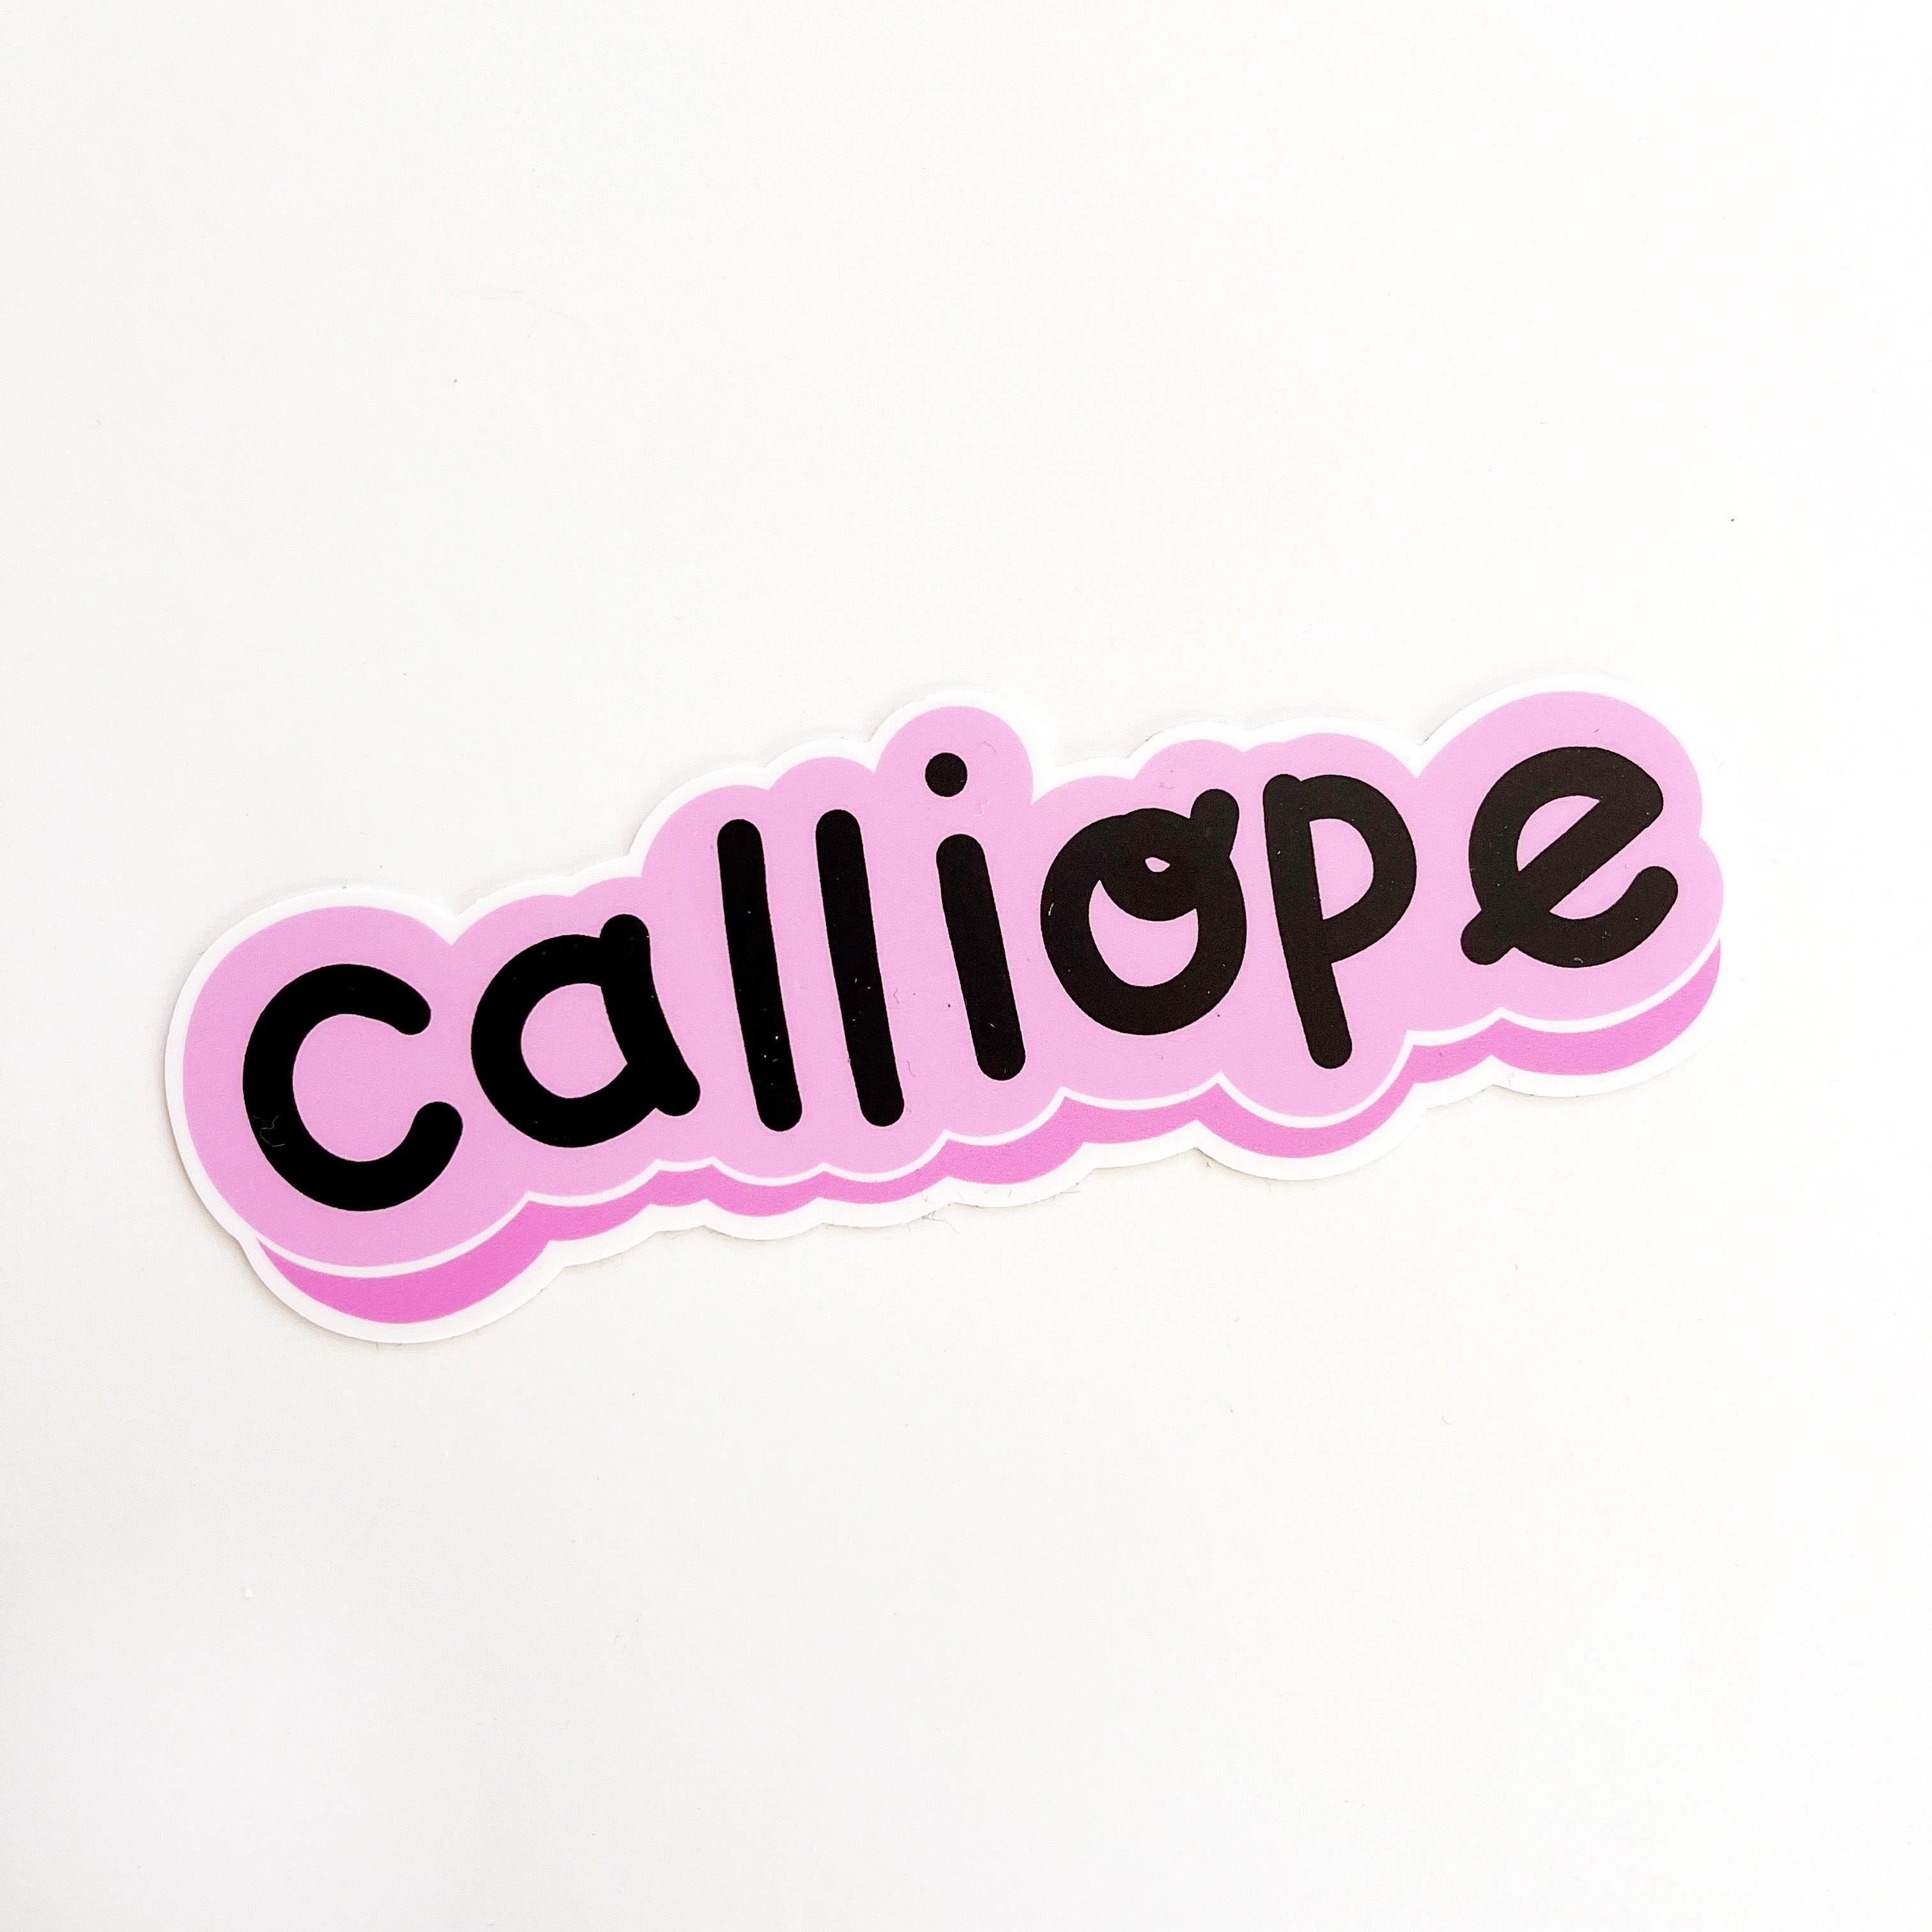 Pink background with shadow of brighter pink on bottom and white outline of image with black text says, “Calliope”.  